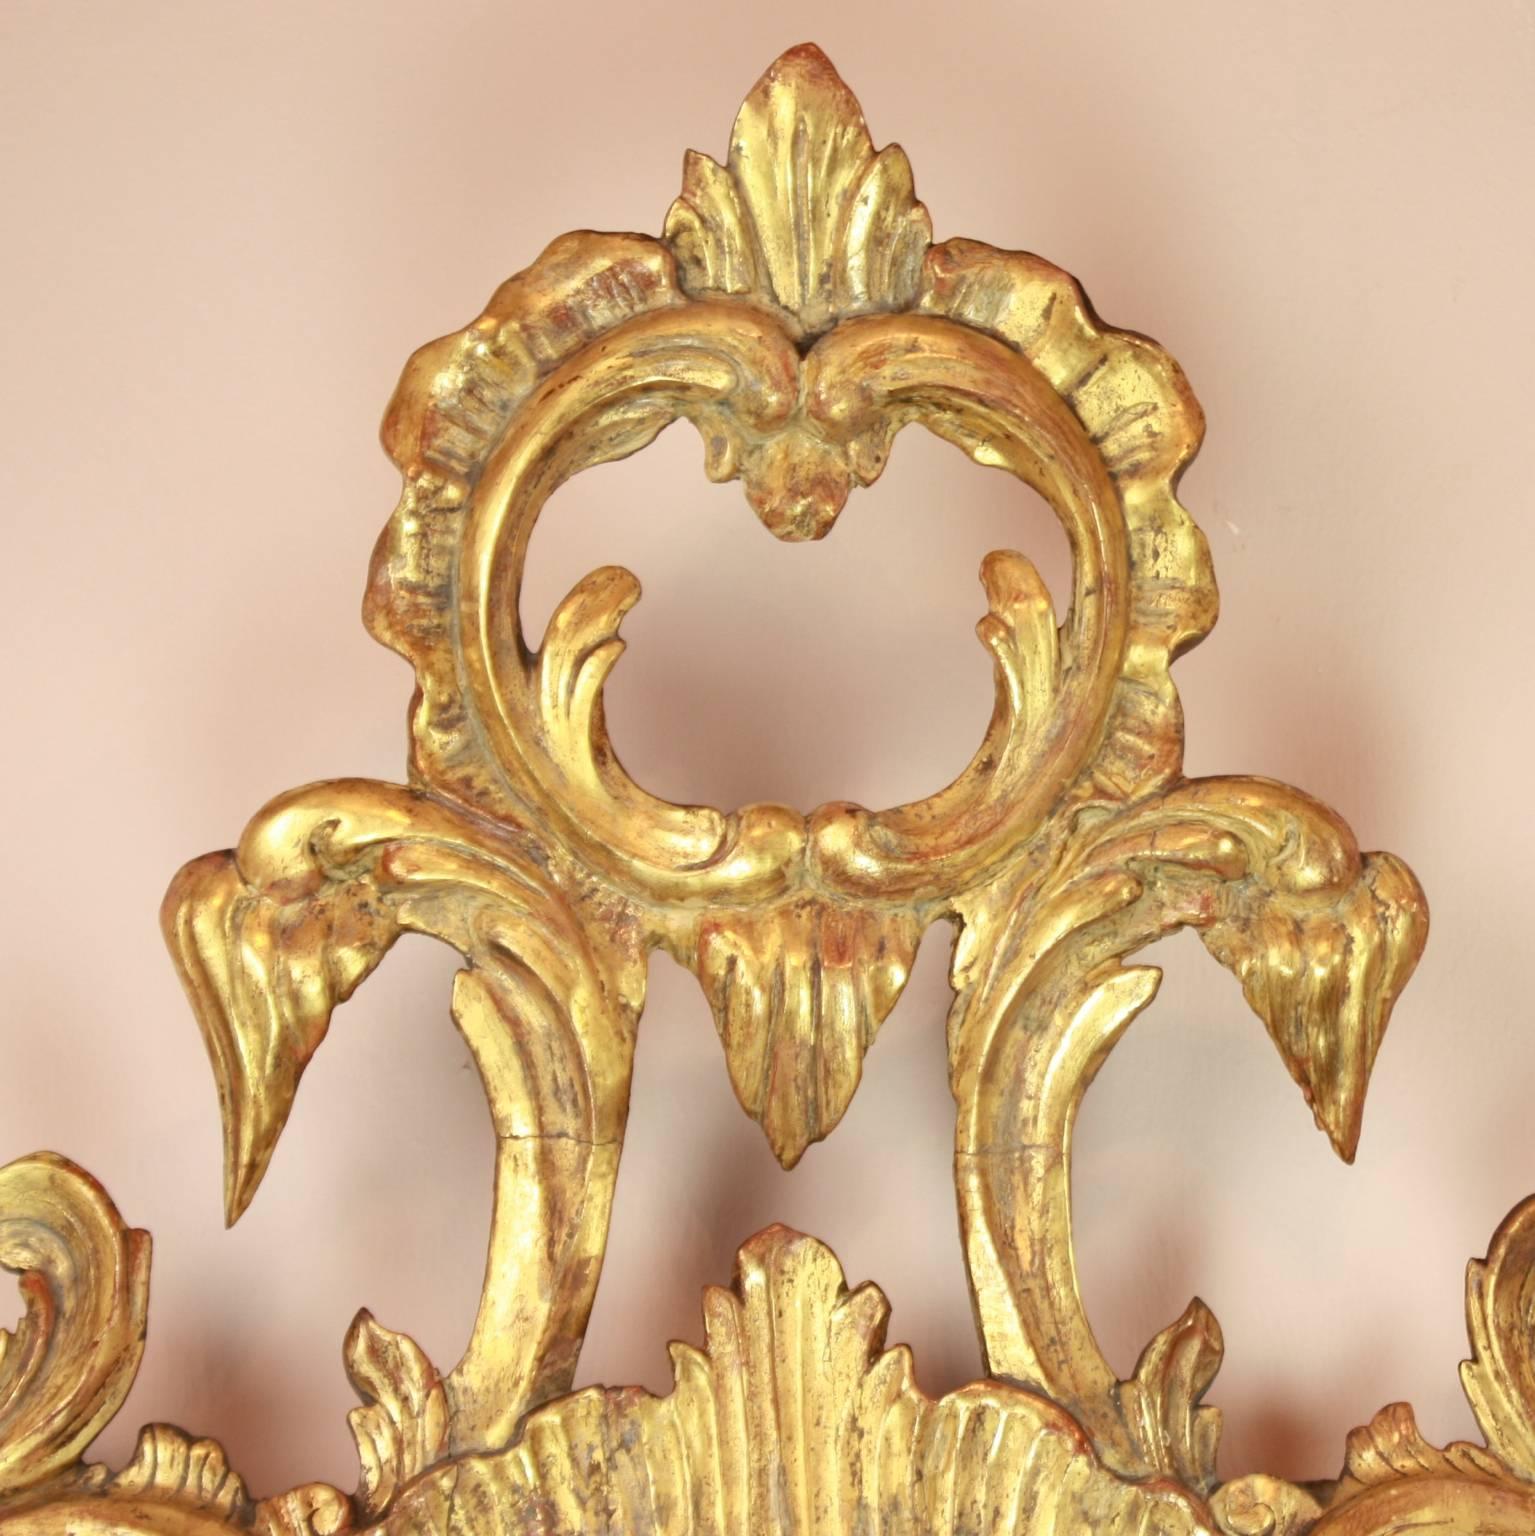 A pair of 18th century North Italian giltwood mirrors and former girandoles or sconces. Elaborately carved in symmetrical form with flowers, leaves, Ho Ho Birds, scrollwork and rocailles. A metal mount for the candle branches still attached at the